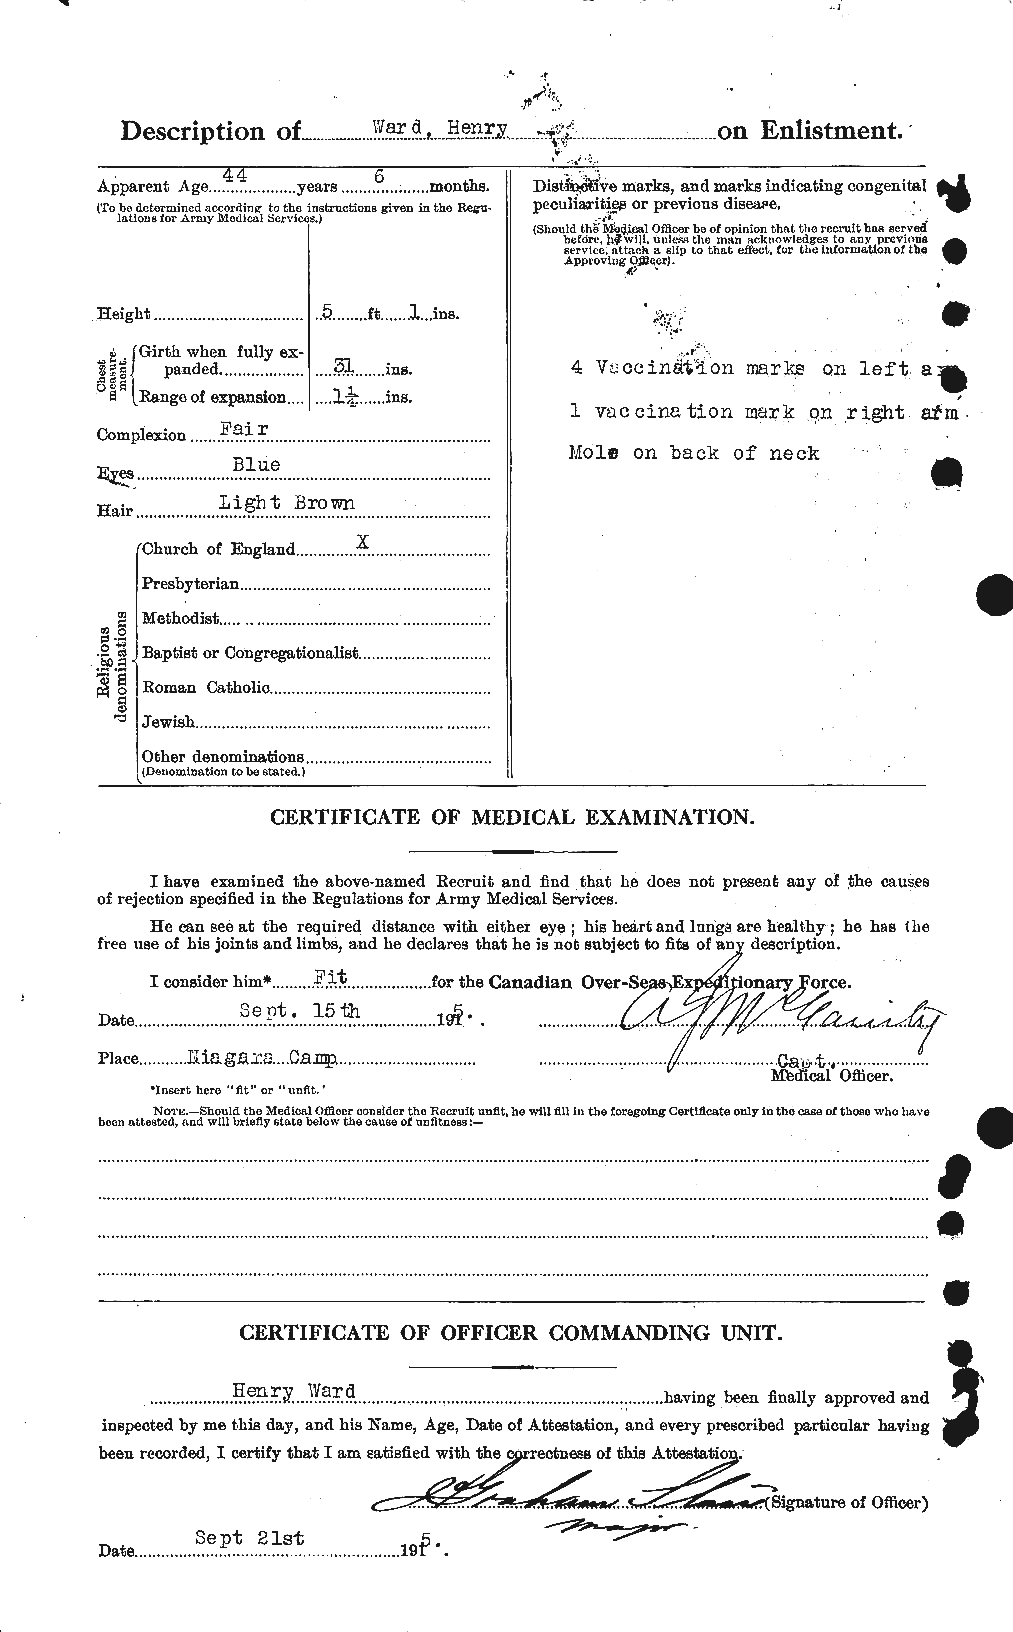 Personnel Records of the First World War - CEF 657819b